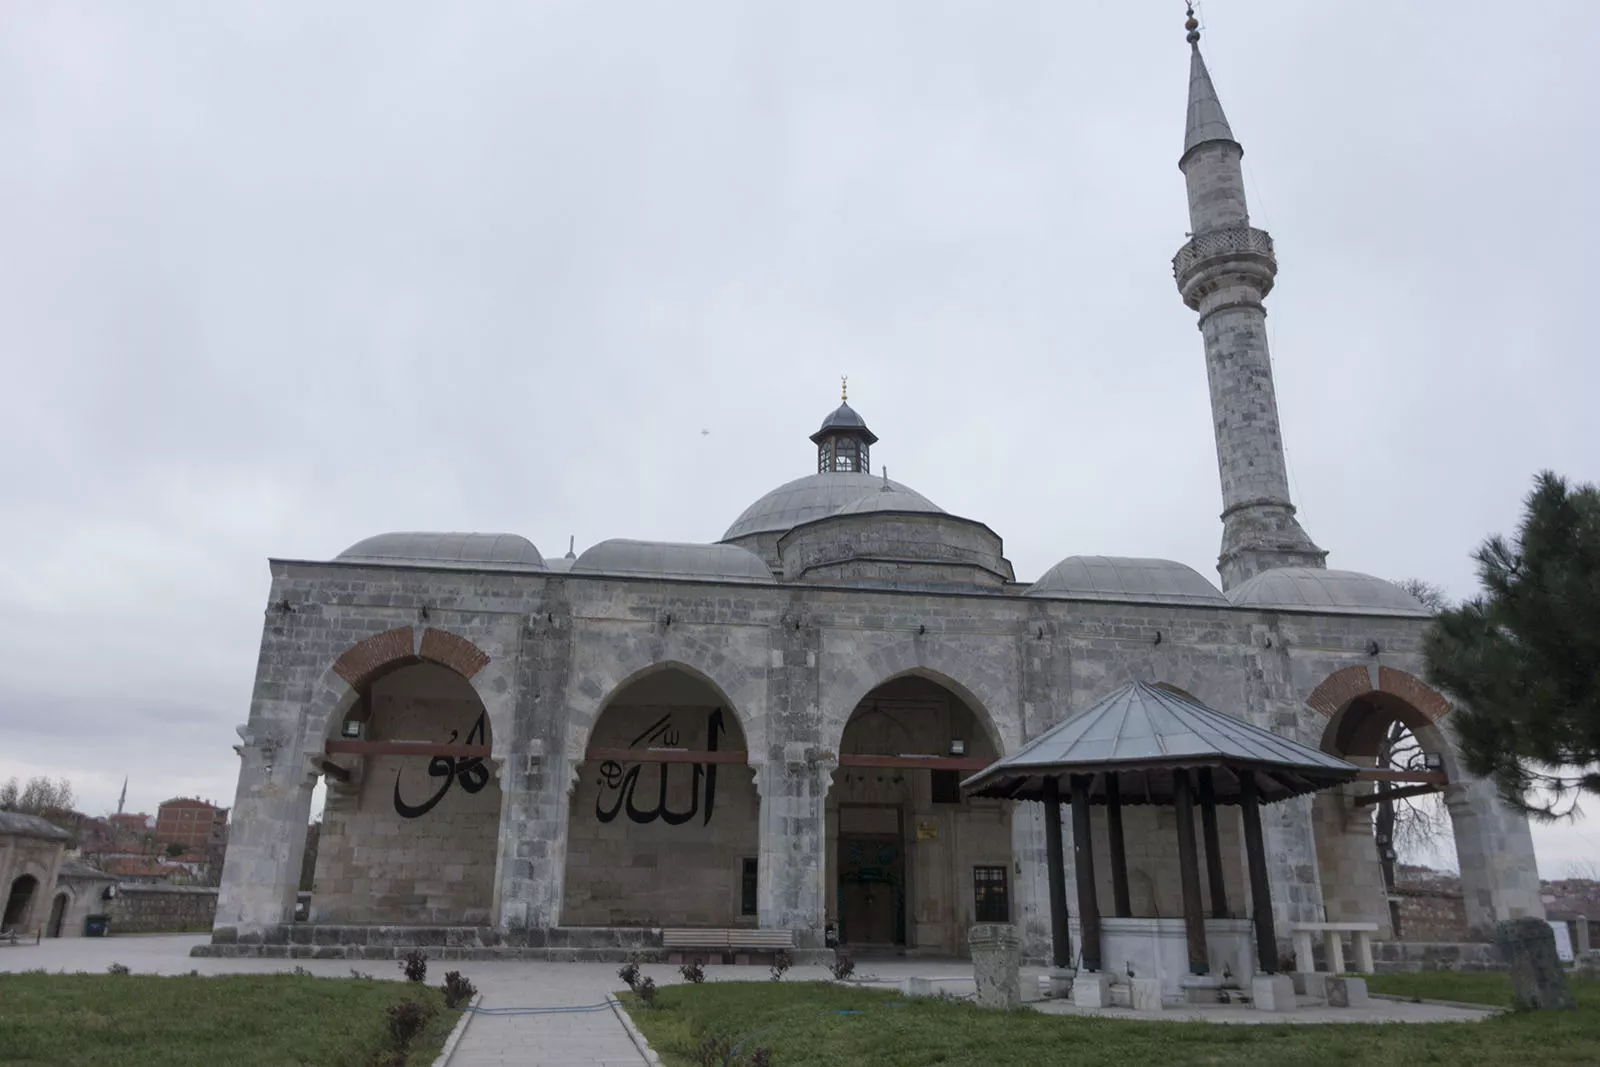 The Muradiye Mosque in Turkey, Central Asia | Architecture - Rated 3.9